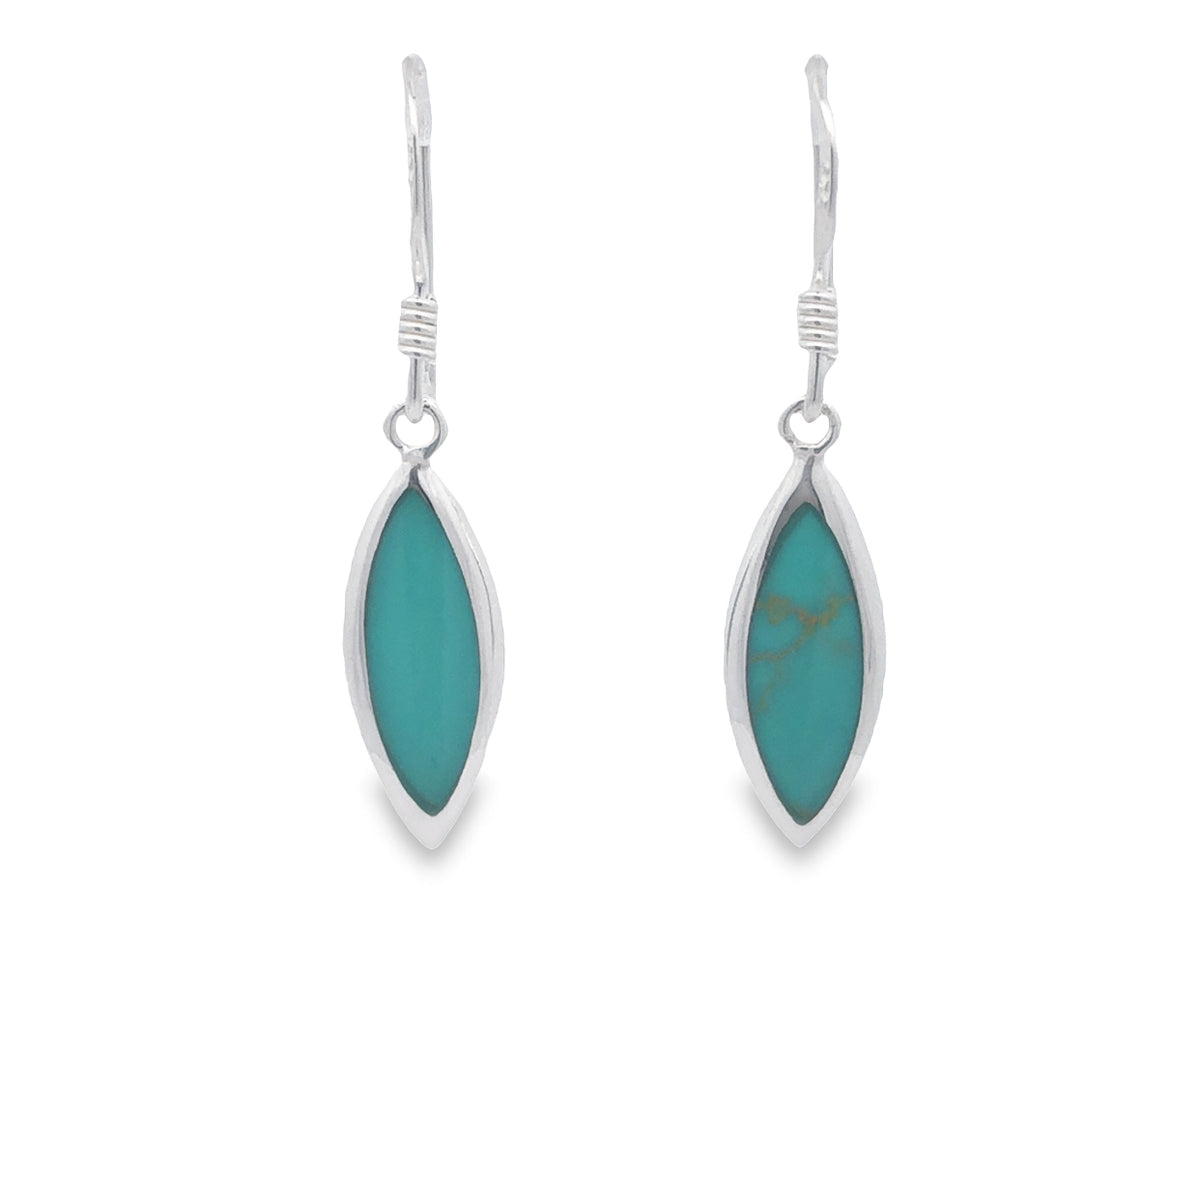 Onatah Sterling Silver Marquise Shaped Light Turquoise Bezel Drop Earrings With Shep Hooks